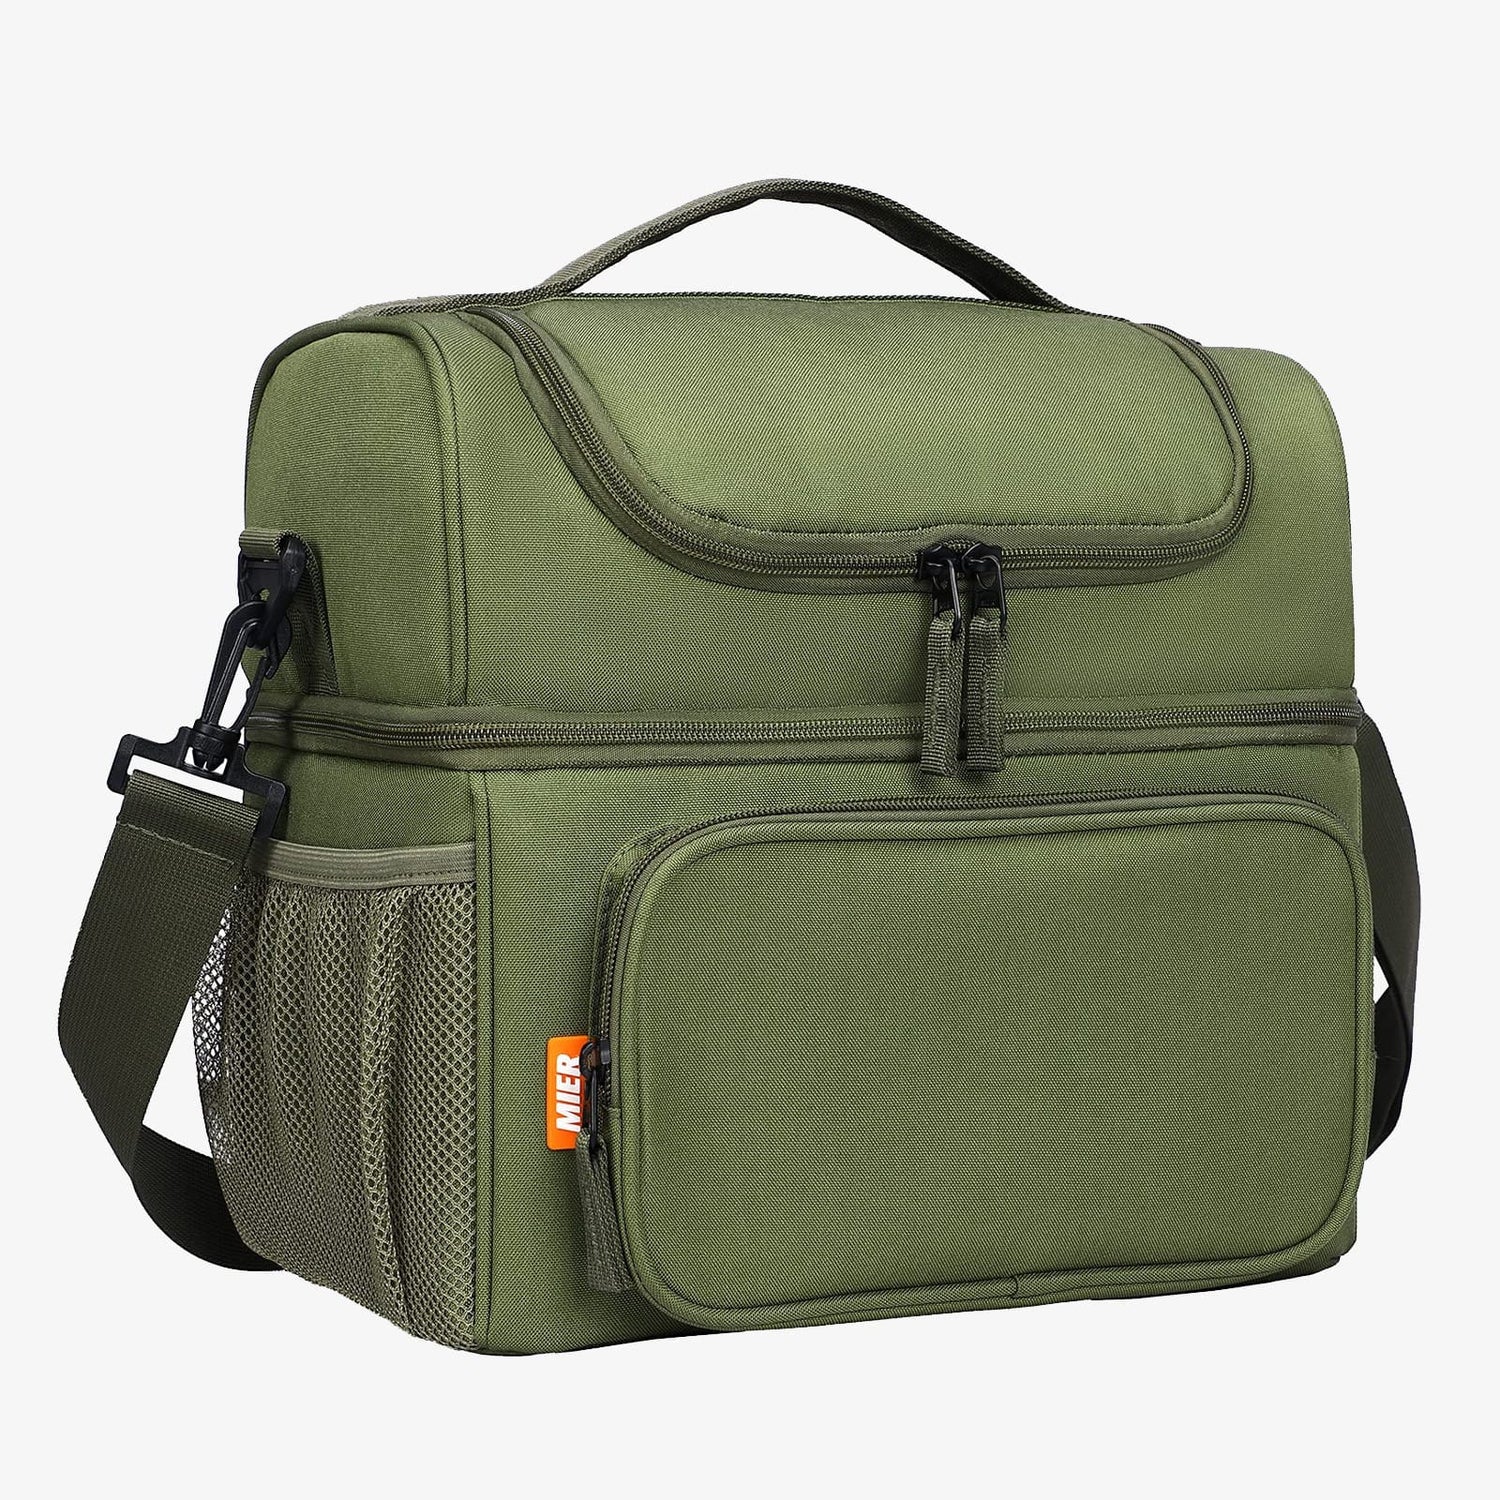 Insulated Lunch Bag Coolers with Shoulder Strap Adult Lunch Bag Army Green MIER